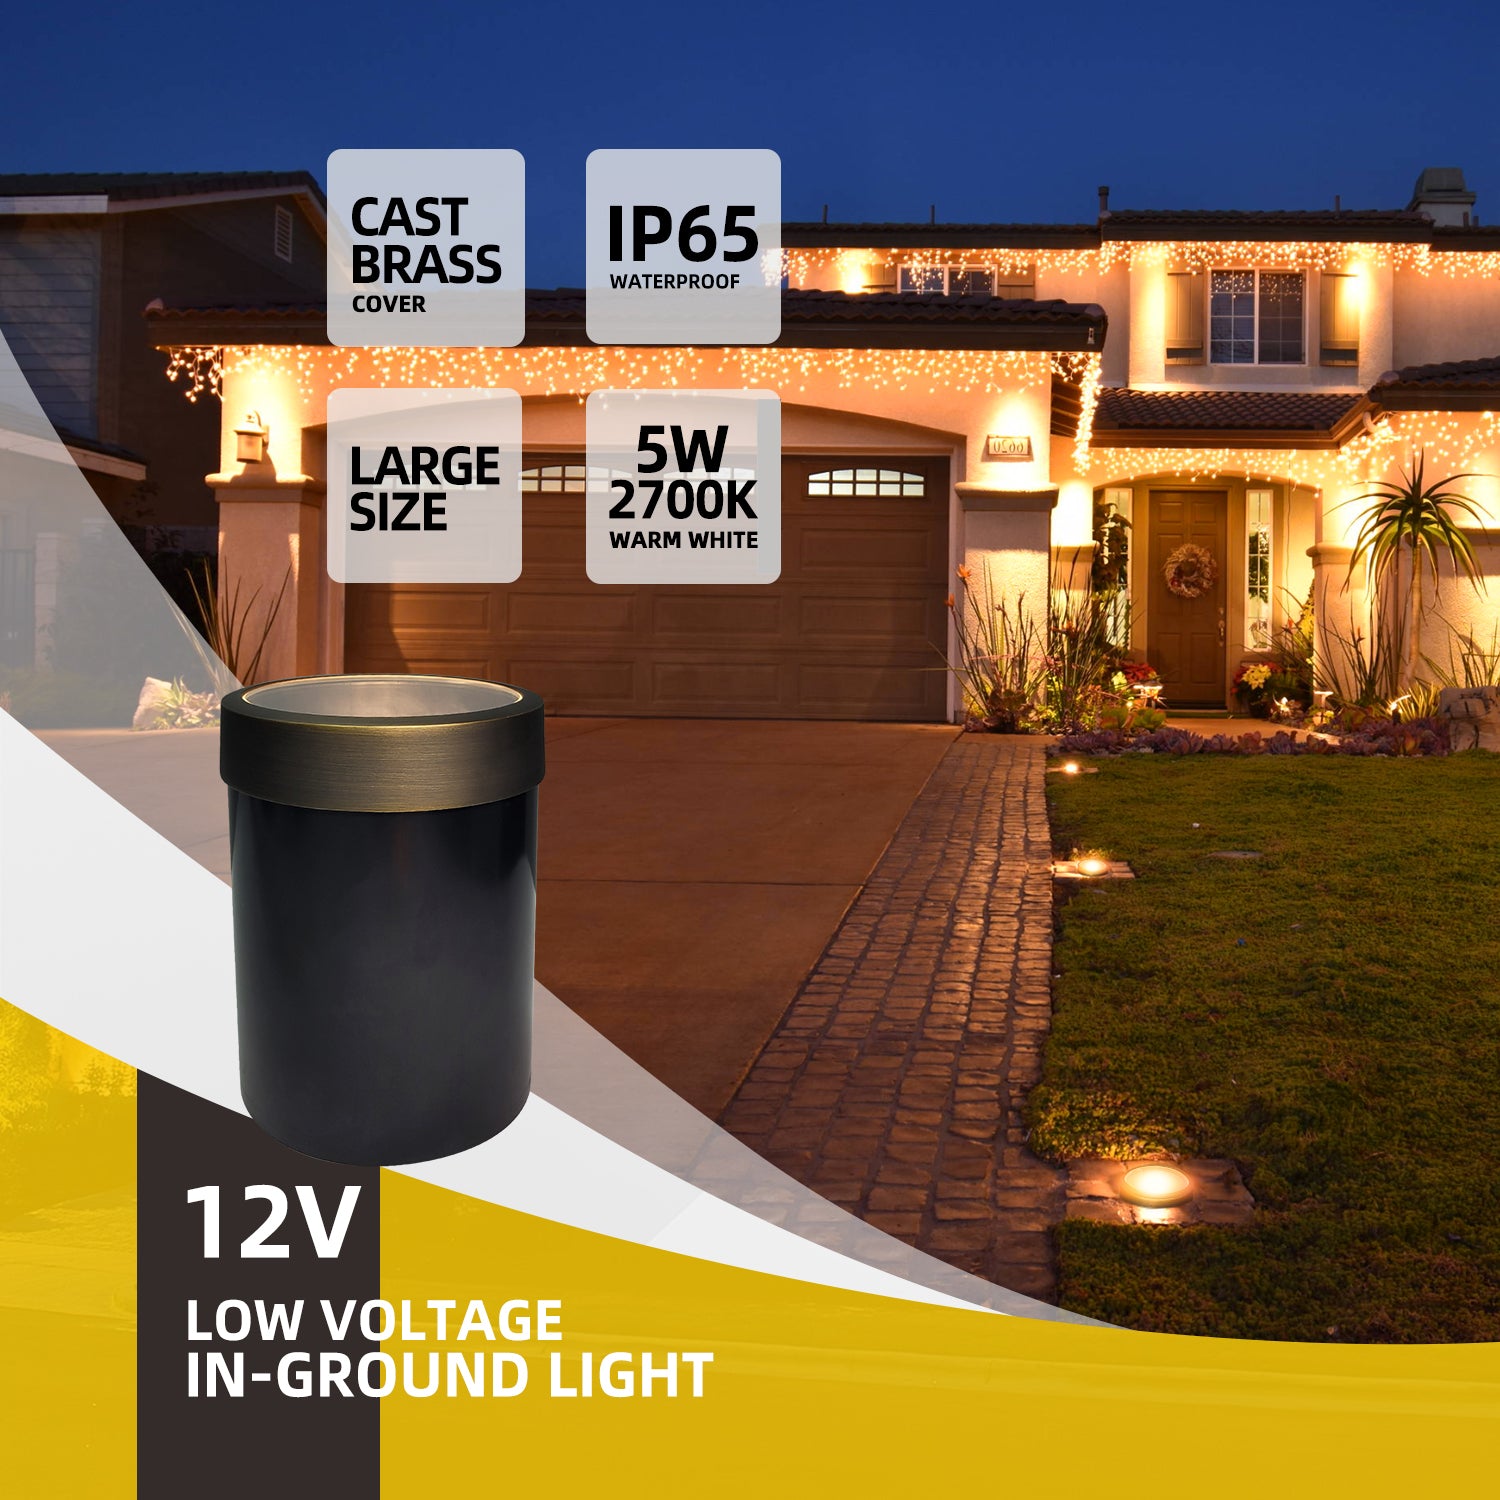 In-Ground Large Size Well Lights,LED Outdoor Low Voltage Pathway Lights COG302B